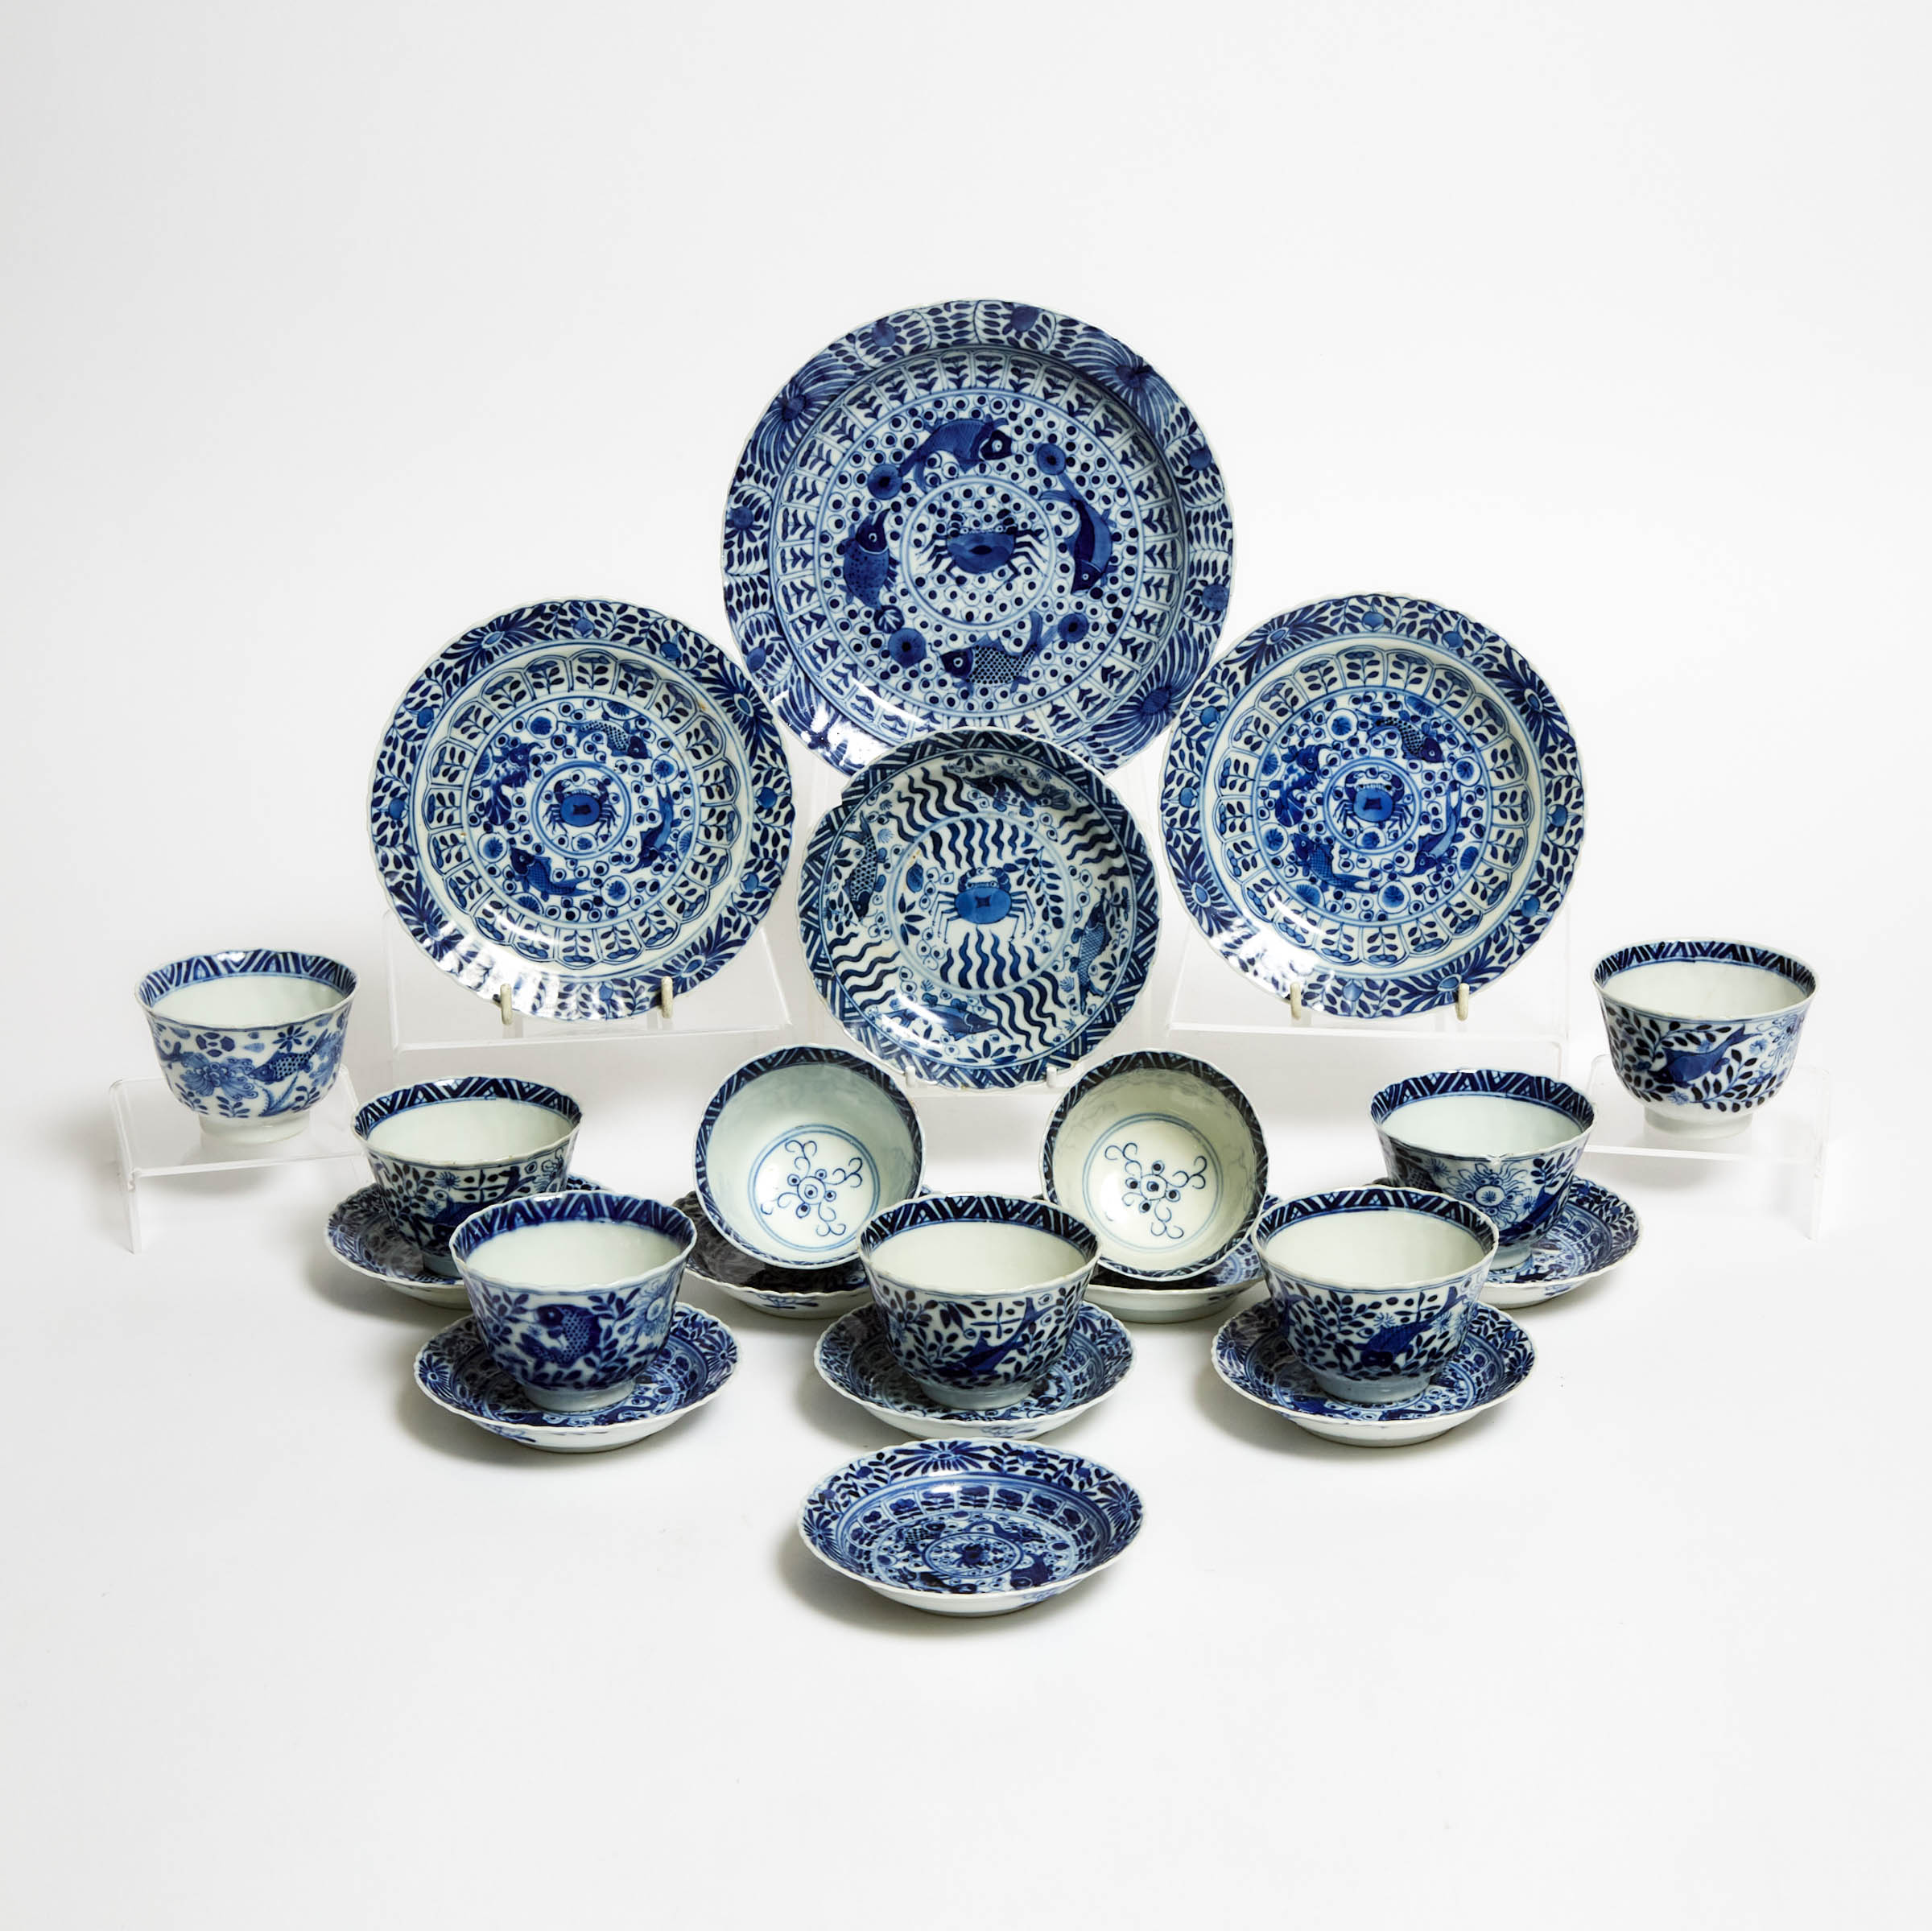 A Group of Twenty-One Blue and White 'Crabs and Fish' Cups, Saucers, and Dishes, Kangxi Period (1662-1722)